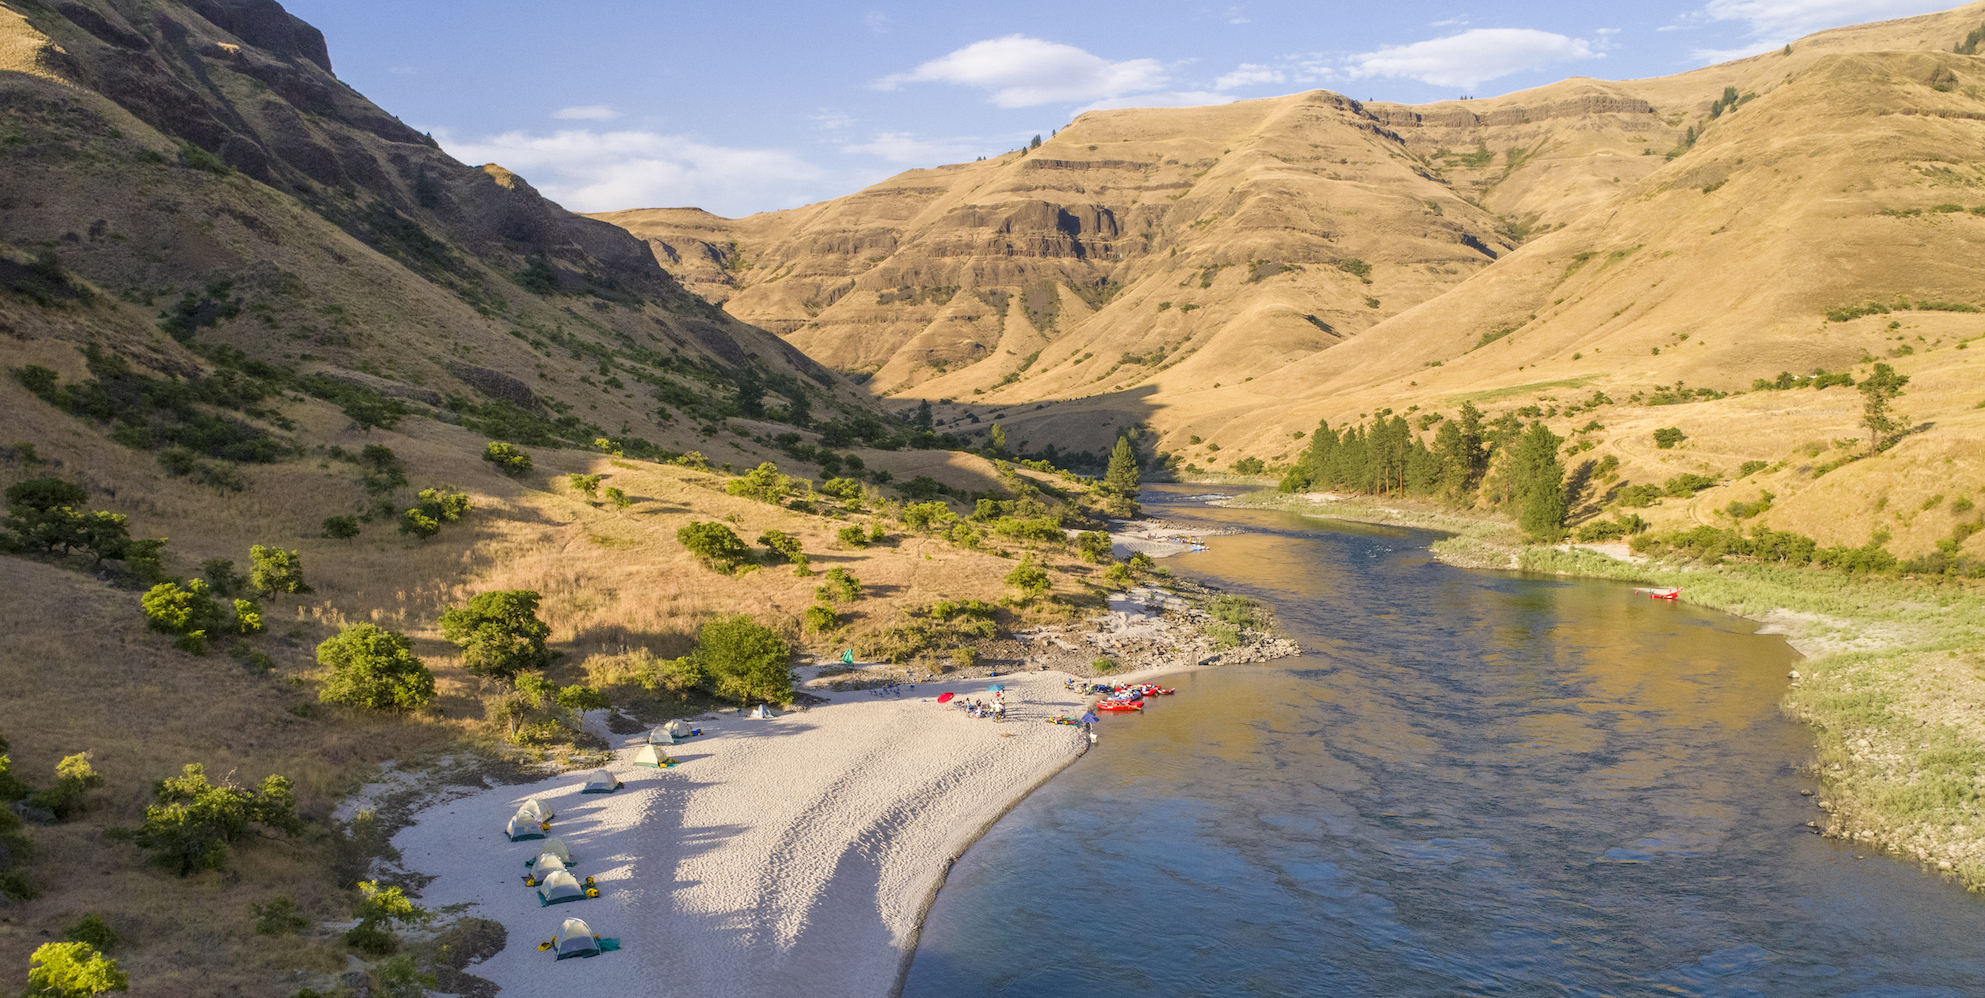 Ariel view of a group of whitewater rafters camping along a sandy beach on the Lower Salmon River in Idaho